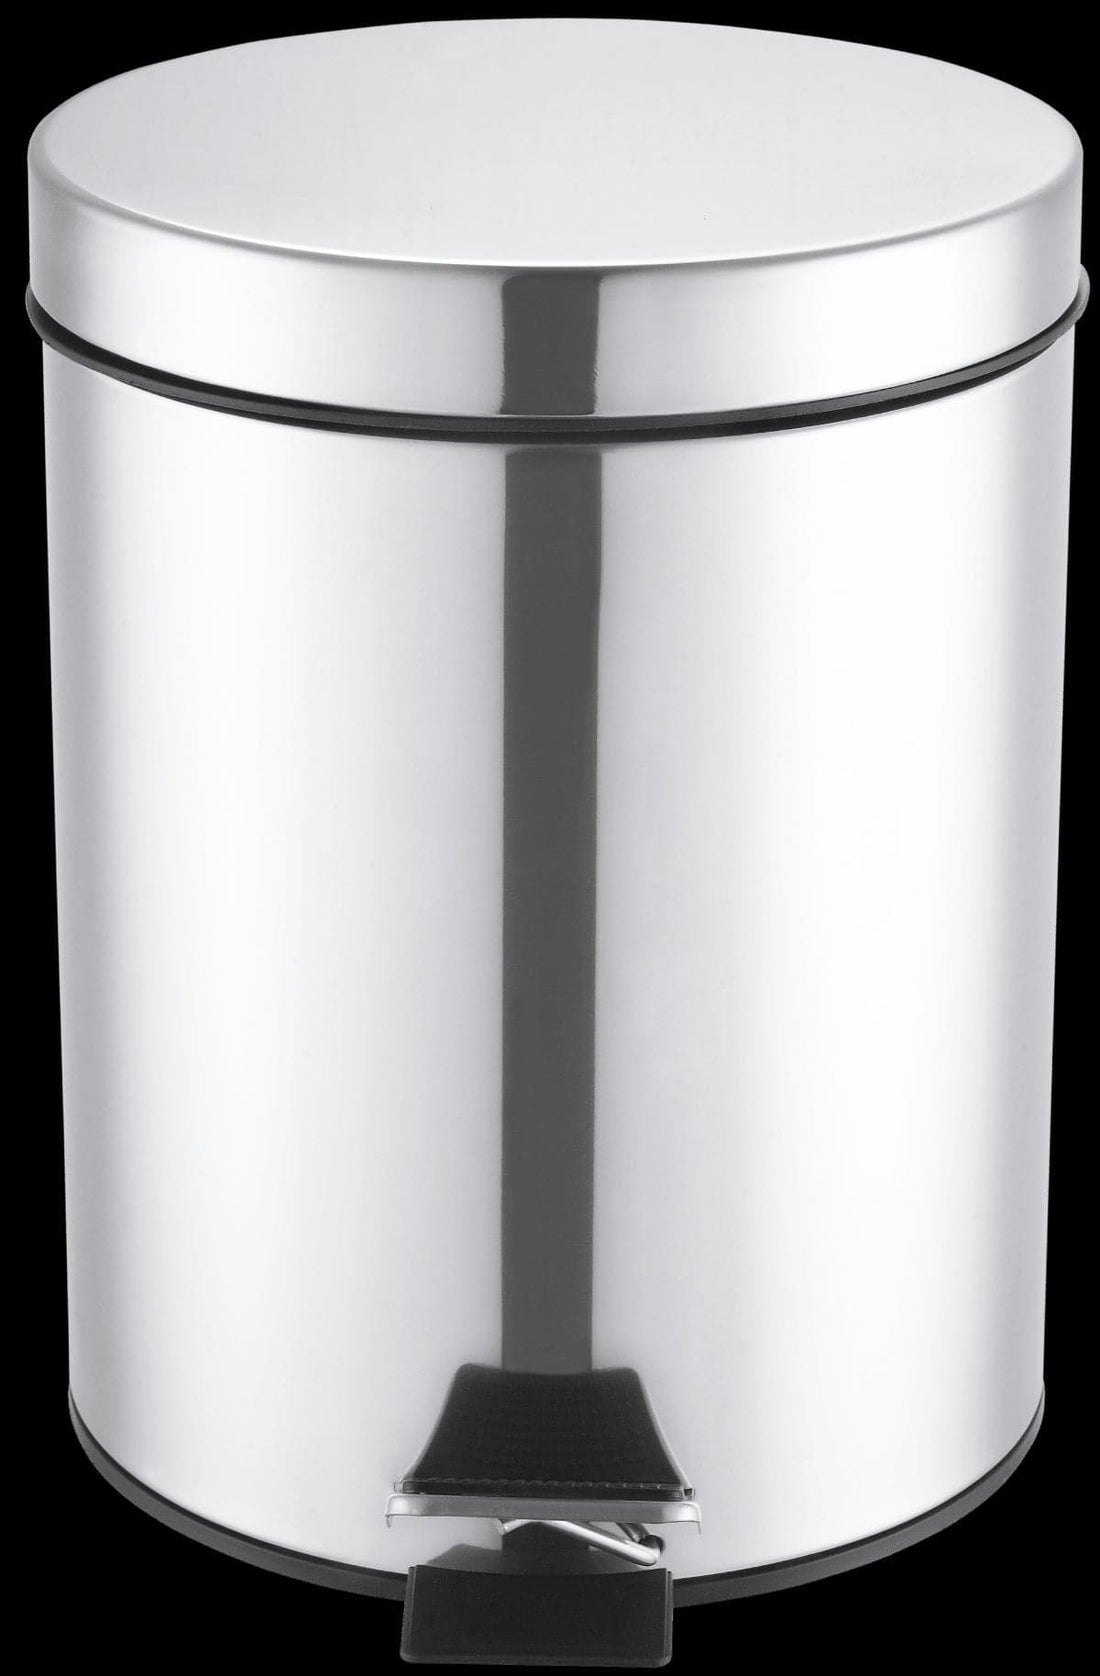 BATHROOM DUSTBIN 5 L CHROME WITH PEDAL - best price from Maltashopper.com BR430460516